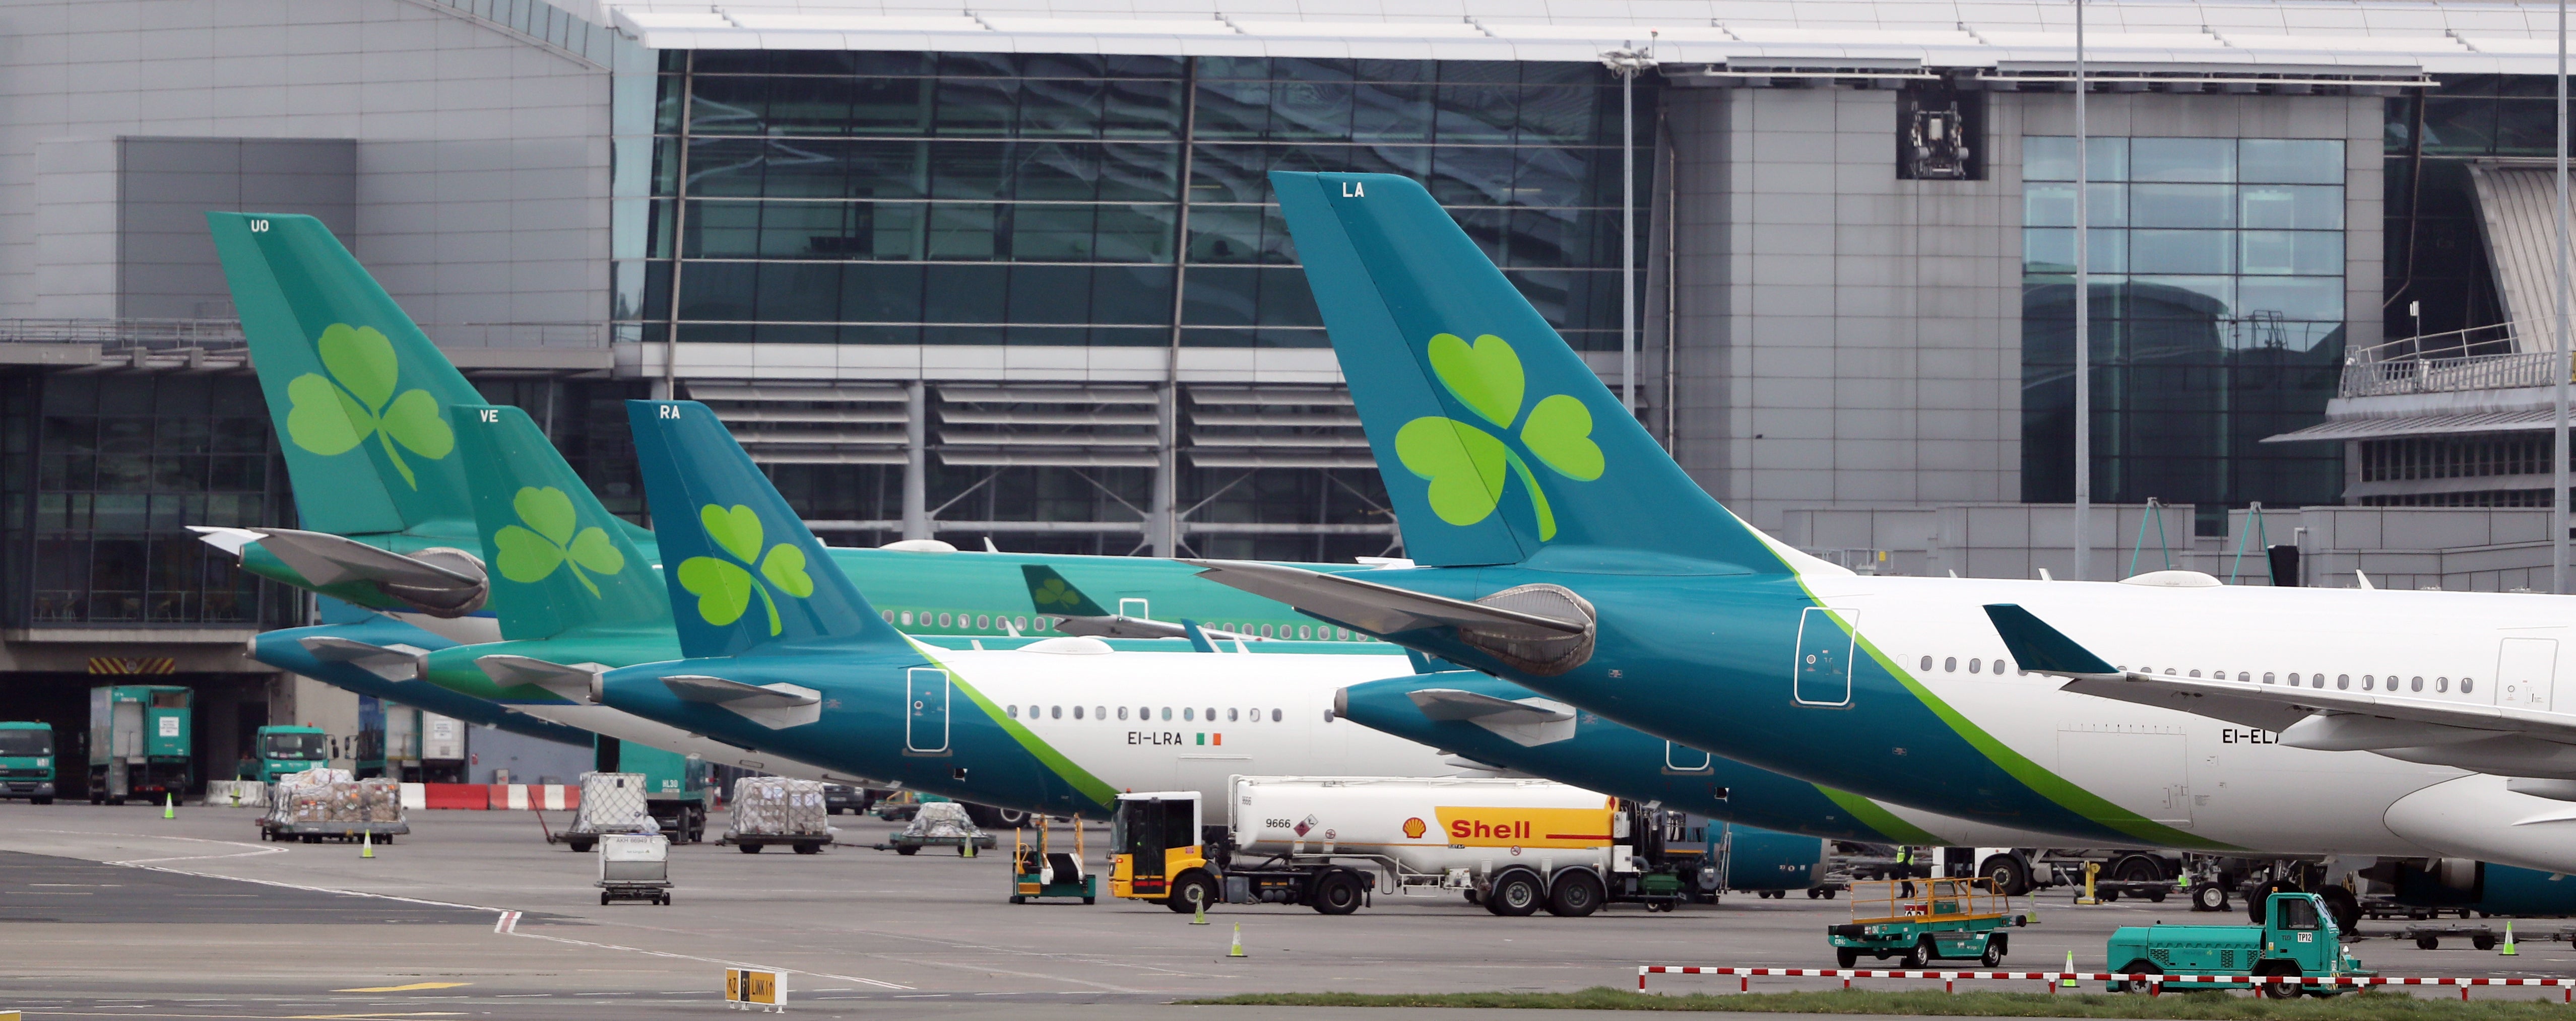 Aer Lingus has cancelled a number of flights after an IT failure (Niall Carson/PA)